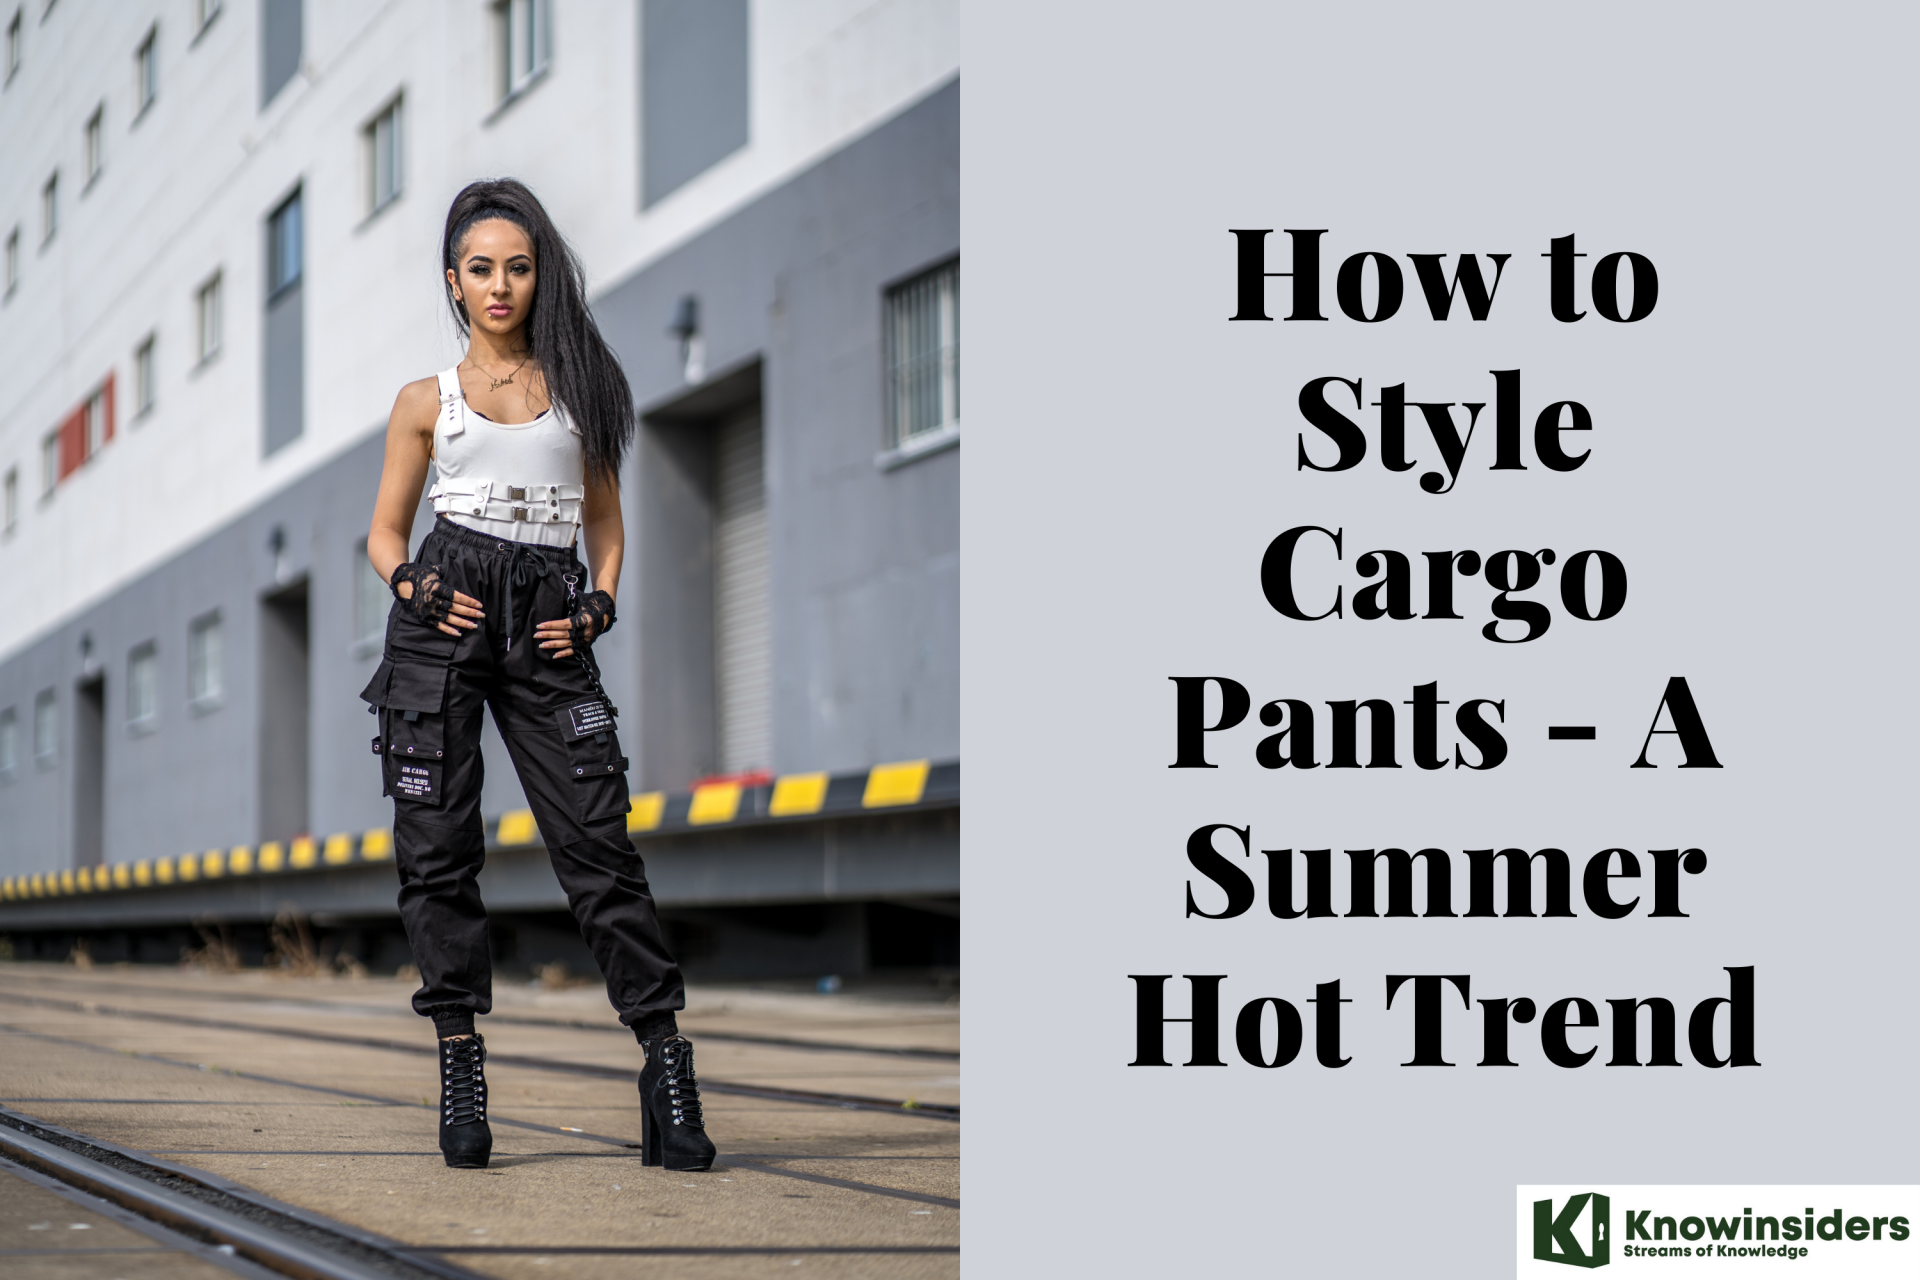 How to Style Cargo Pants - A Summer Hot Trend